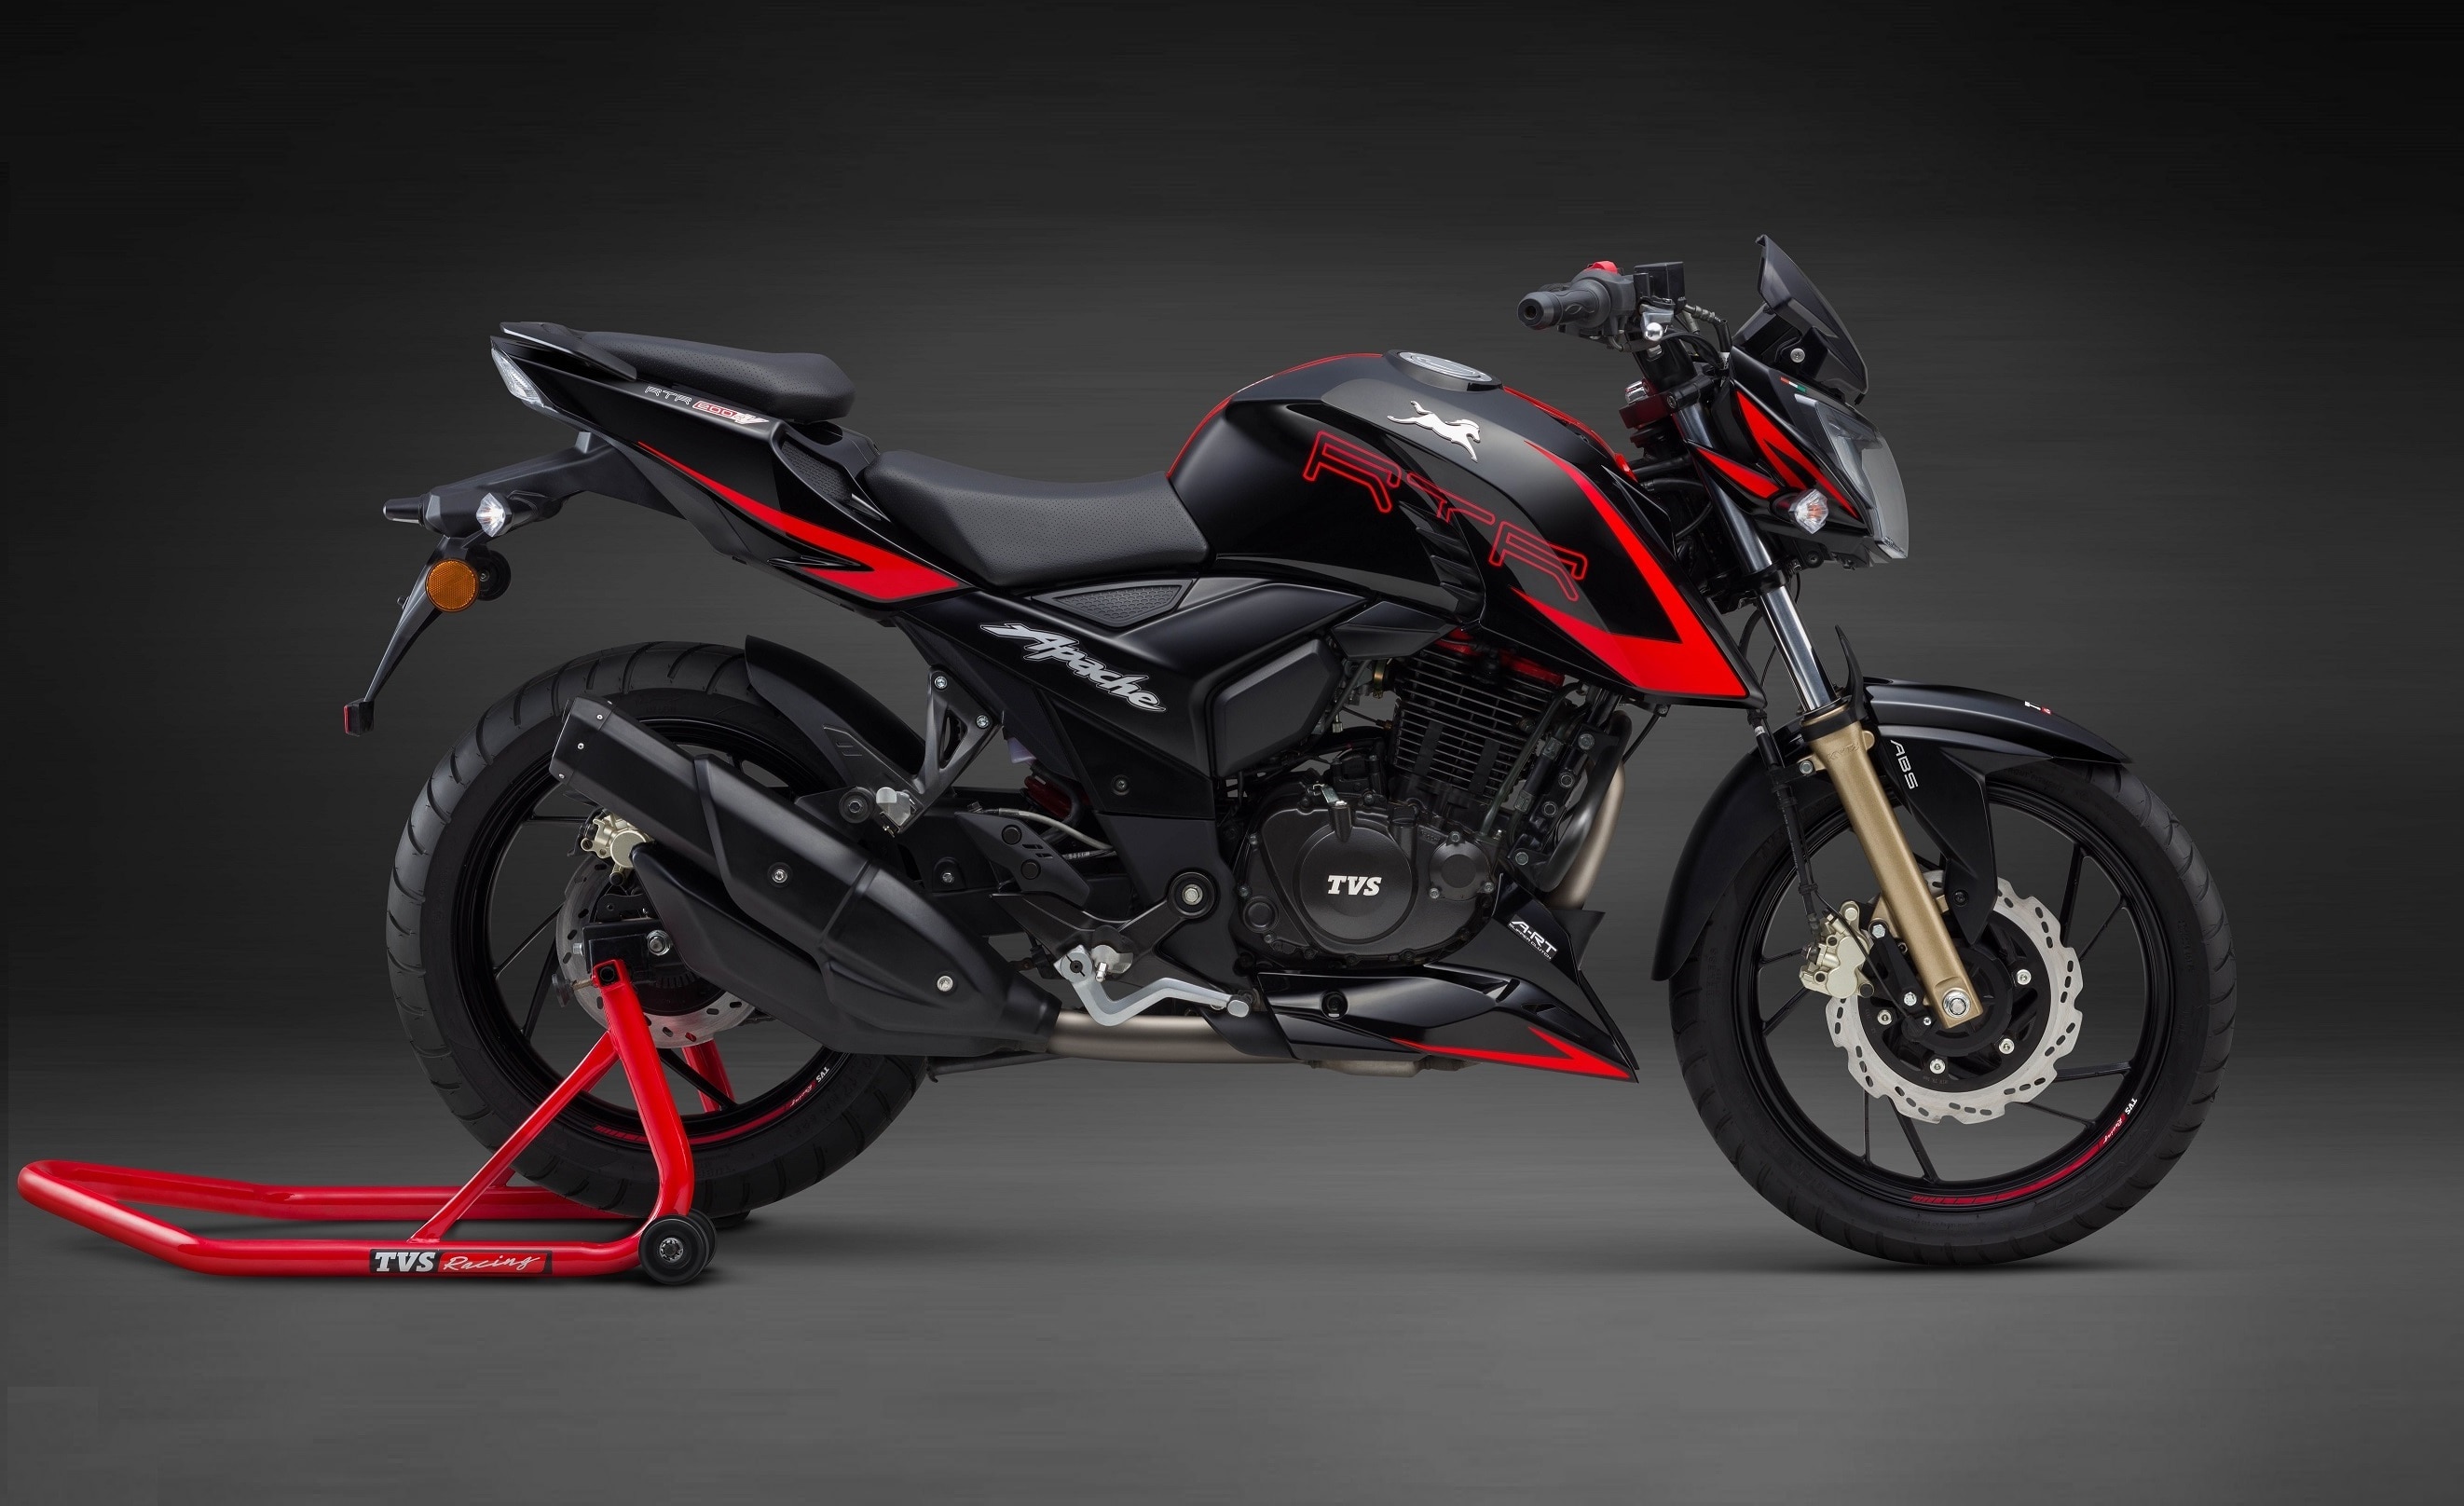 Tvs Apache Rtr 200 4v Racing Edition Launched Price In India